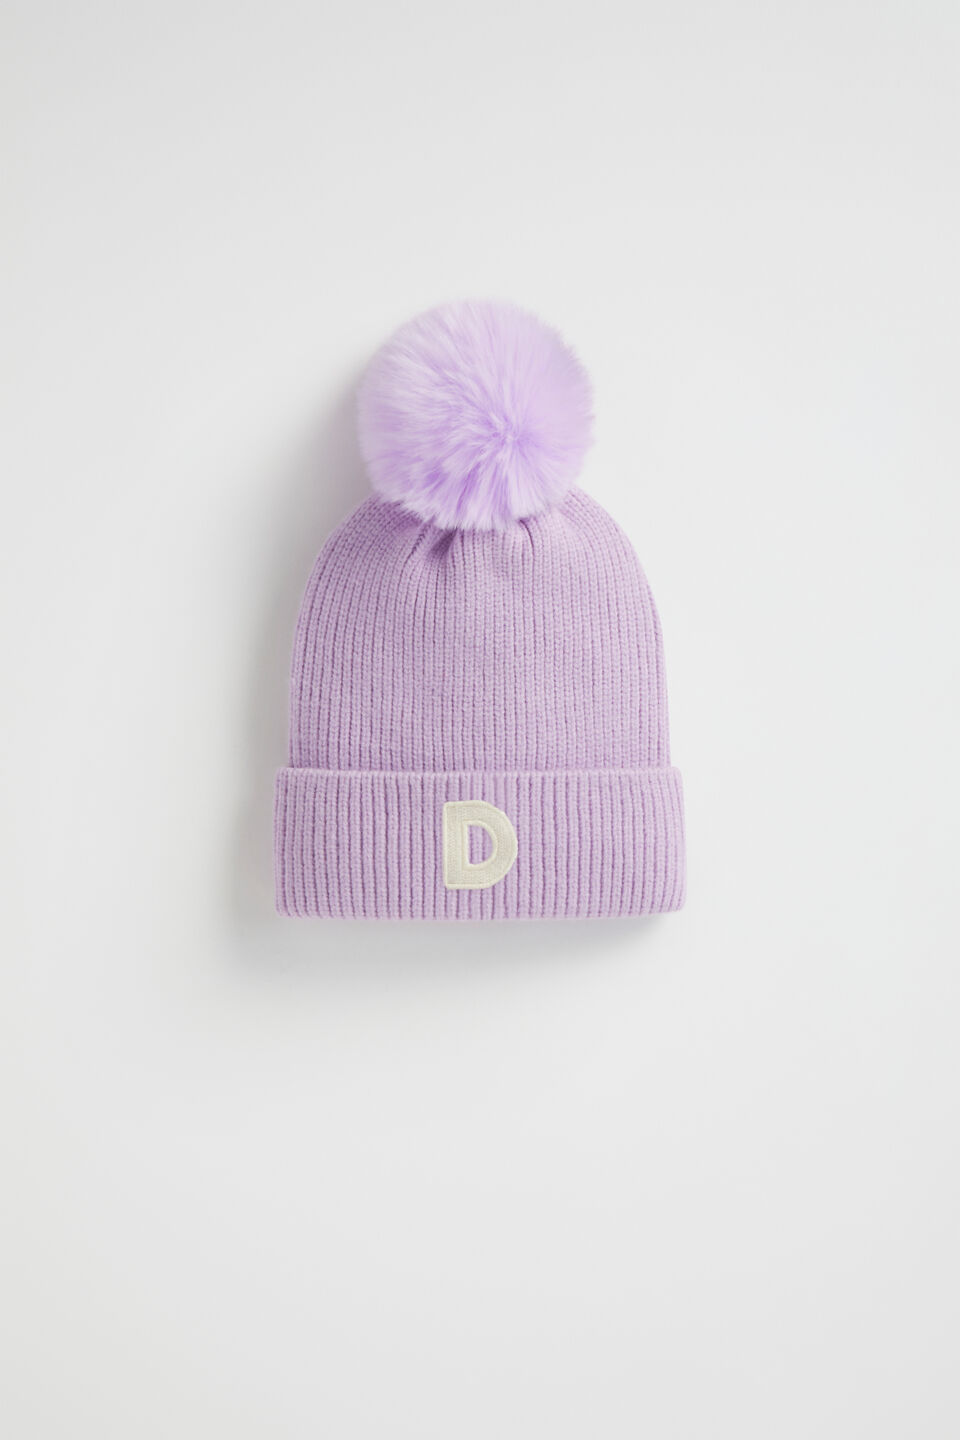 Embroidered Initial Beanie  D